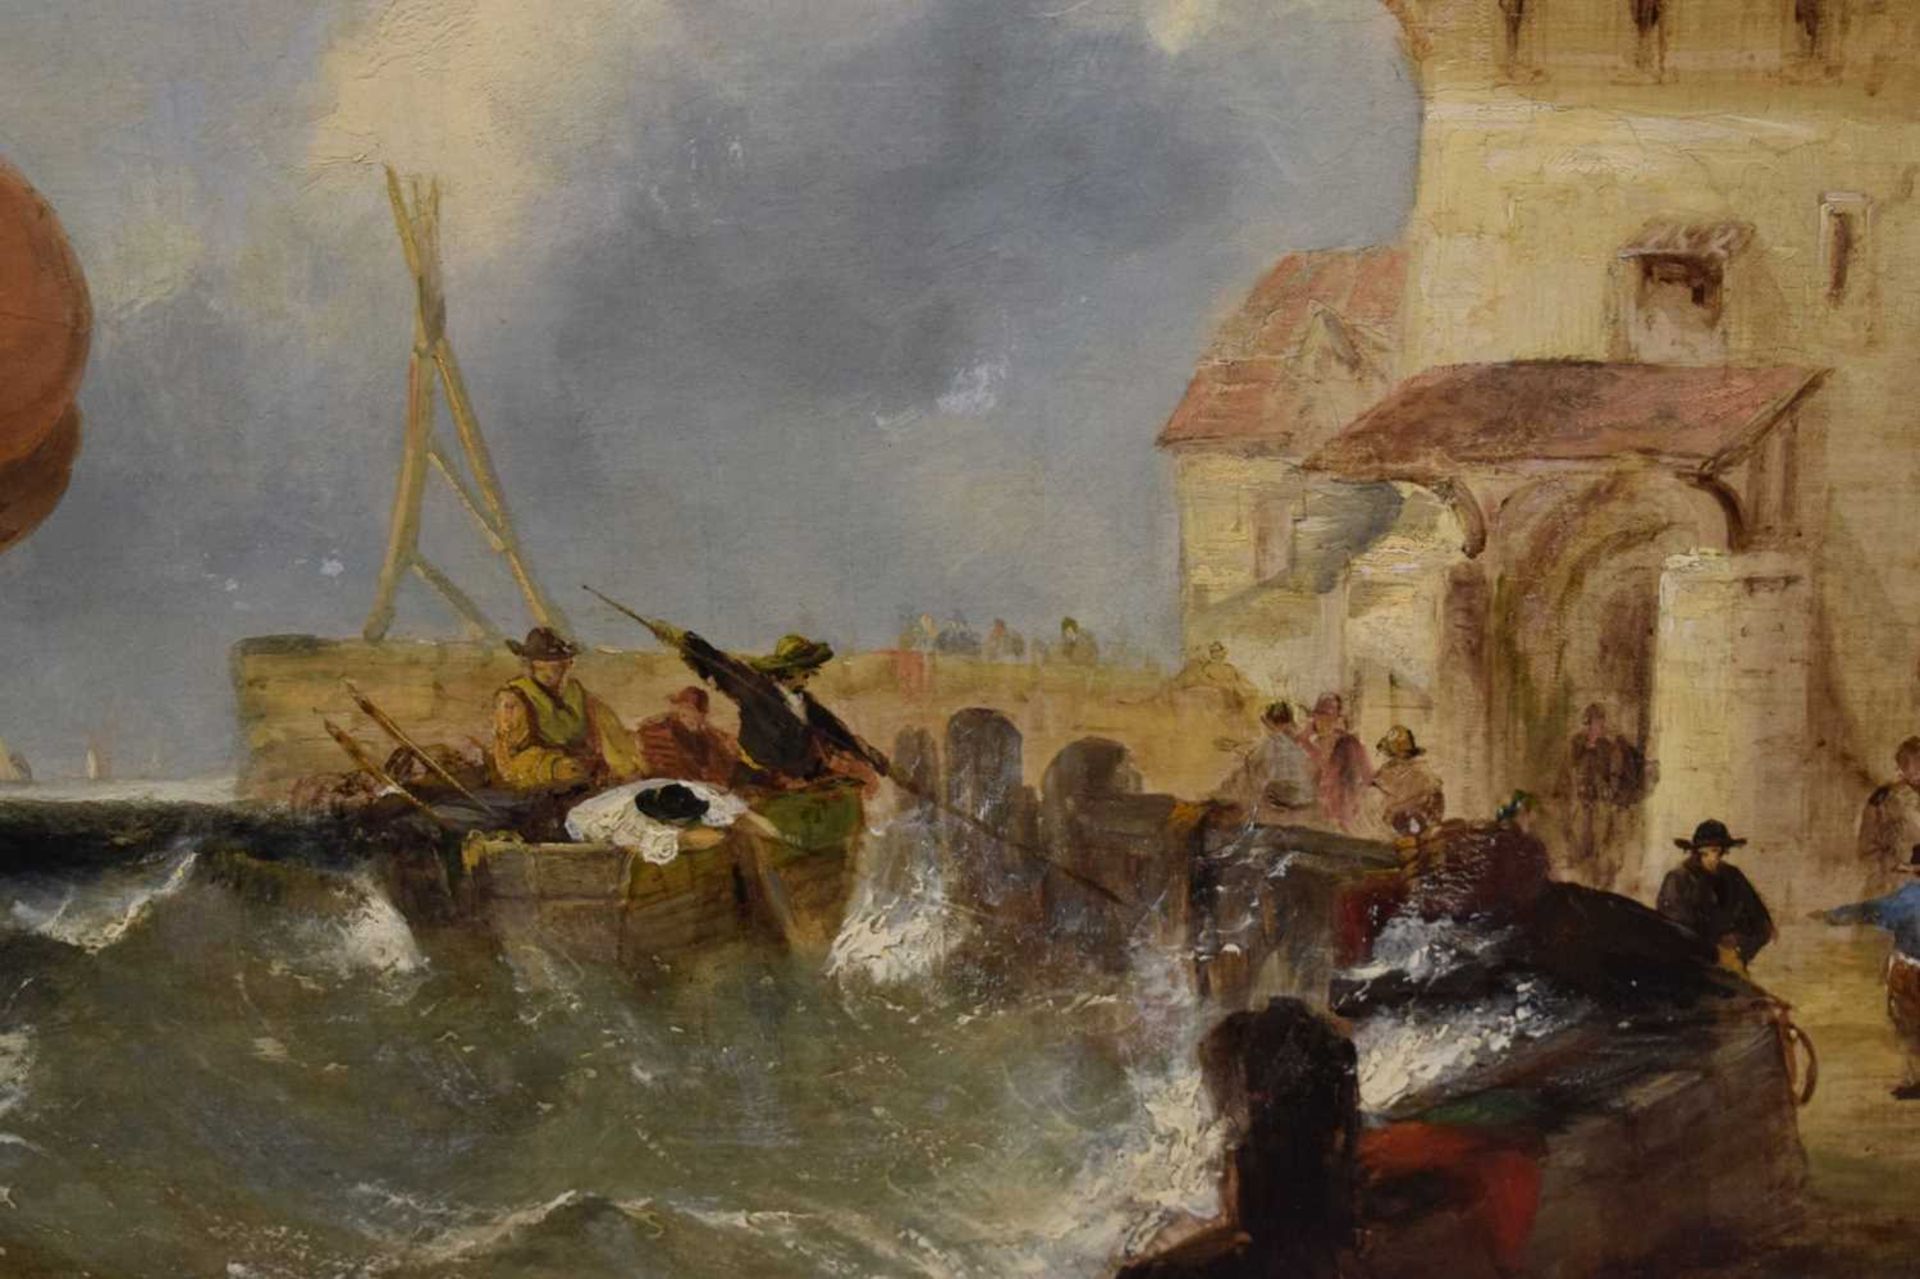 19th century continental school - Oil on canvas - Ship in a stormy coastal port - Image 13 of 19